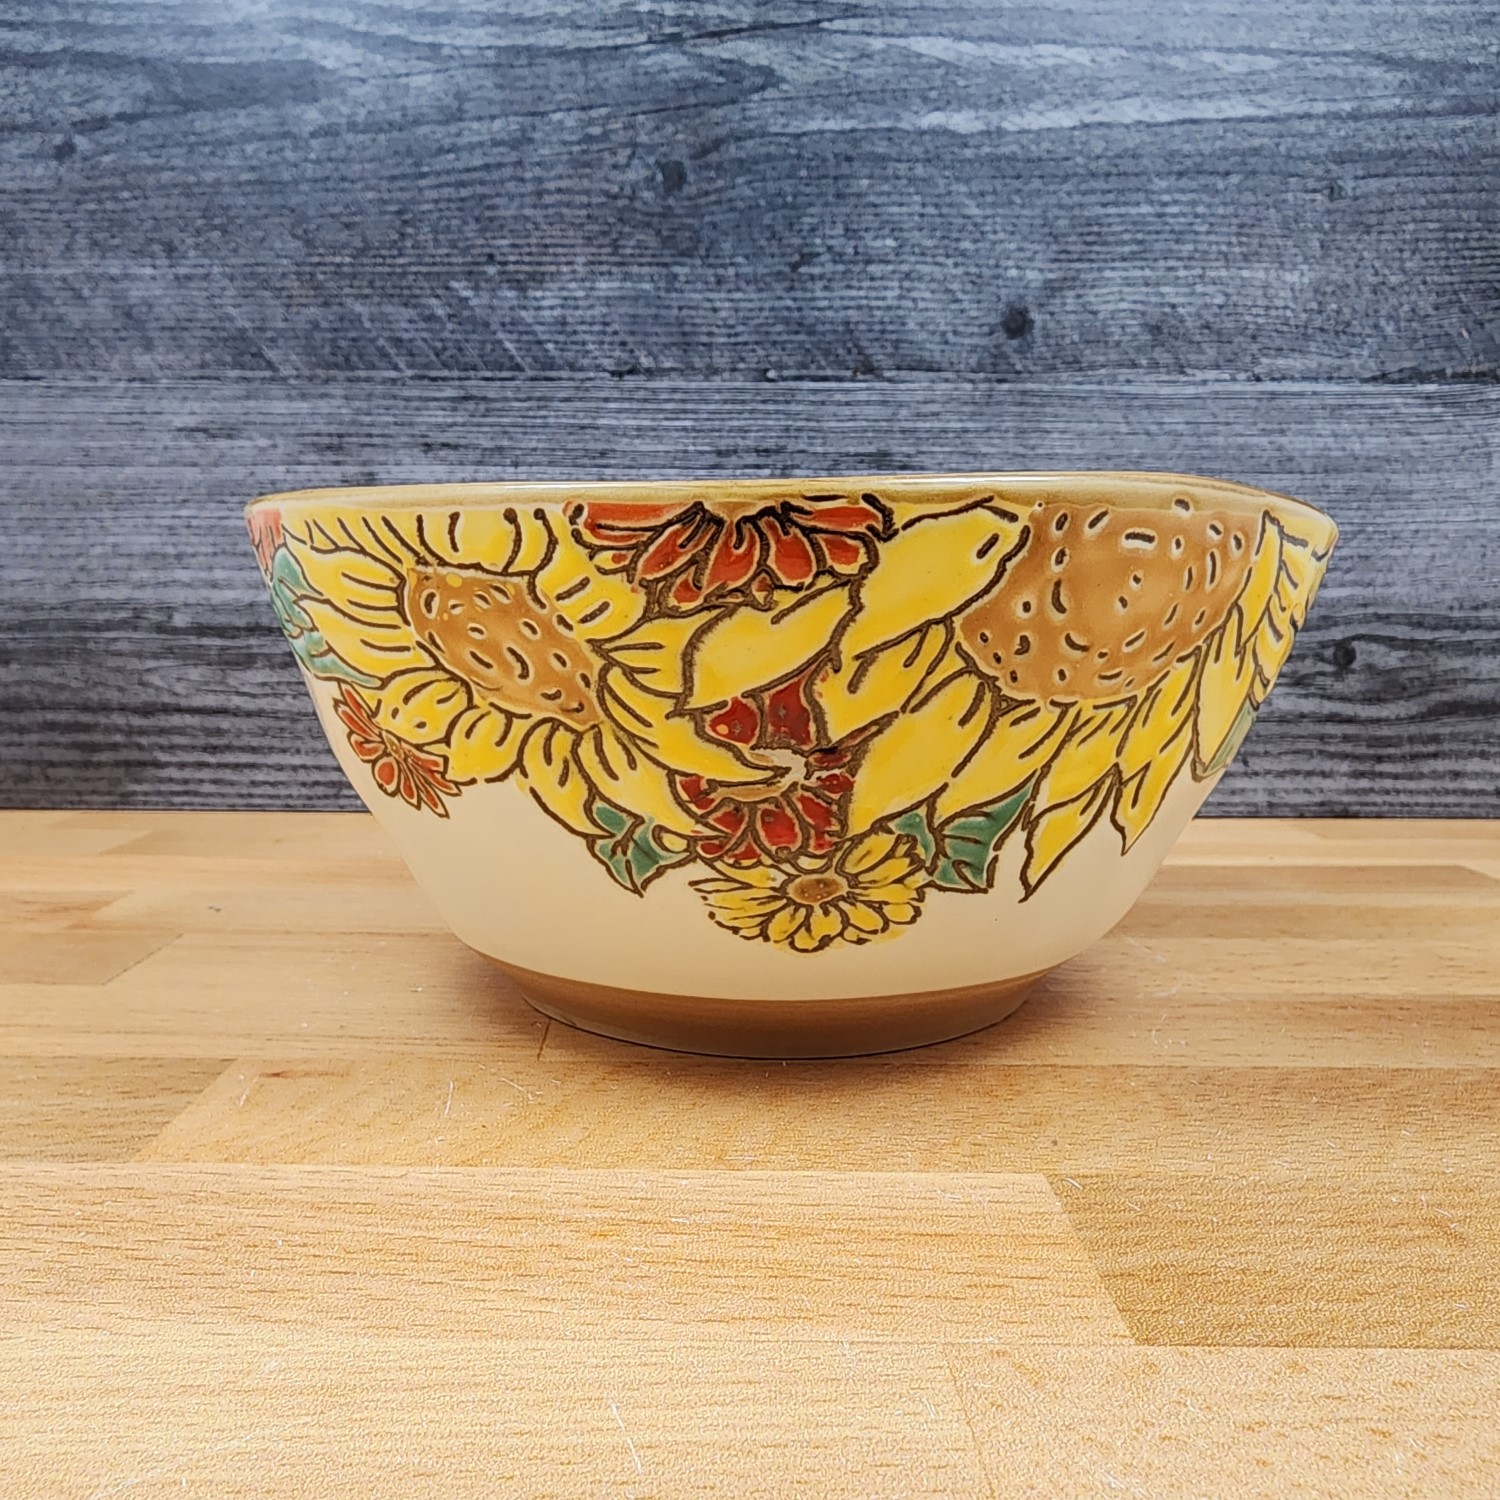 This Brandywine Sunflower Floral Festive Bowl in Yellow 6 inch (15cm) by Blue Sky is made with love by Premier Homegoods! Shop more unique gift ideas today with Spots Initiatives, the best way to support creators.